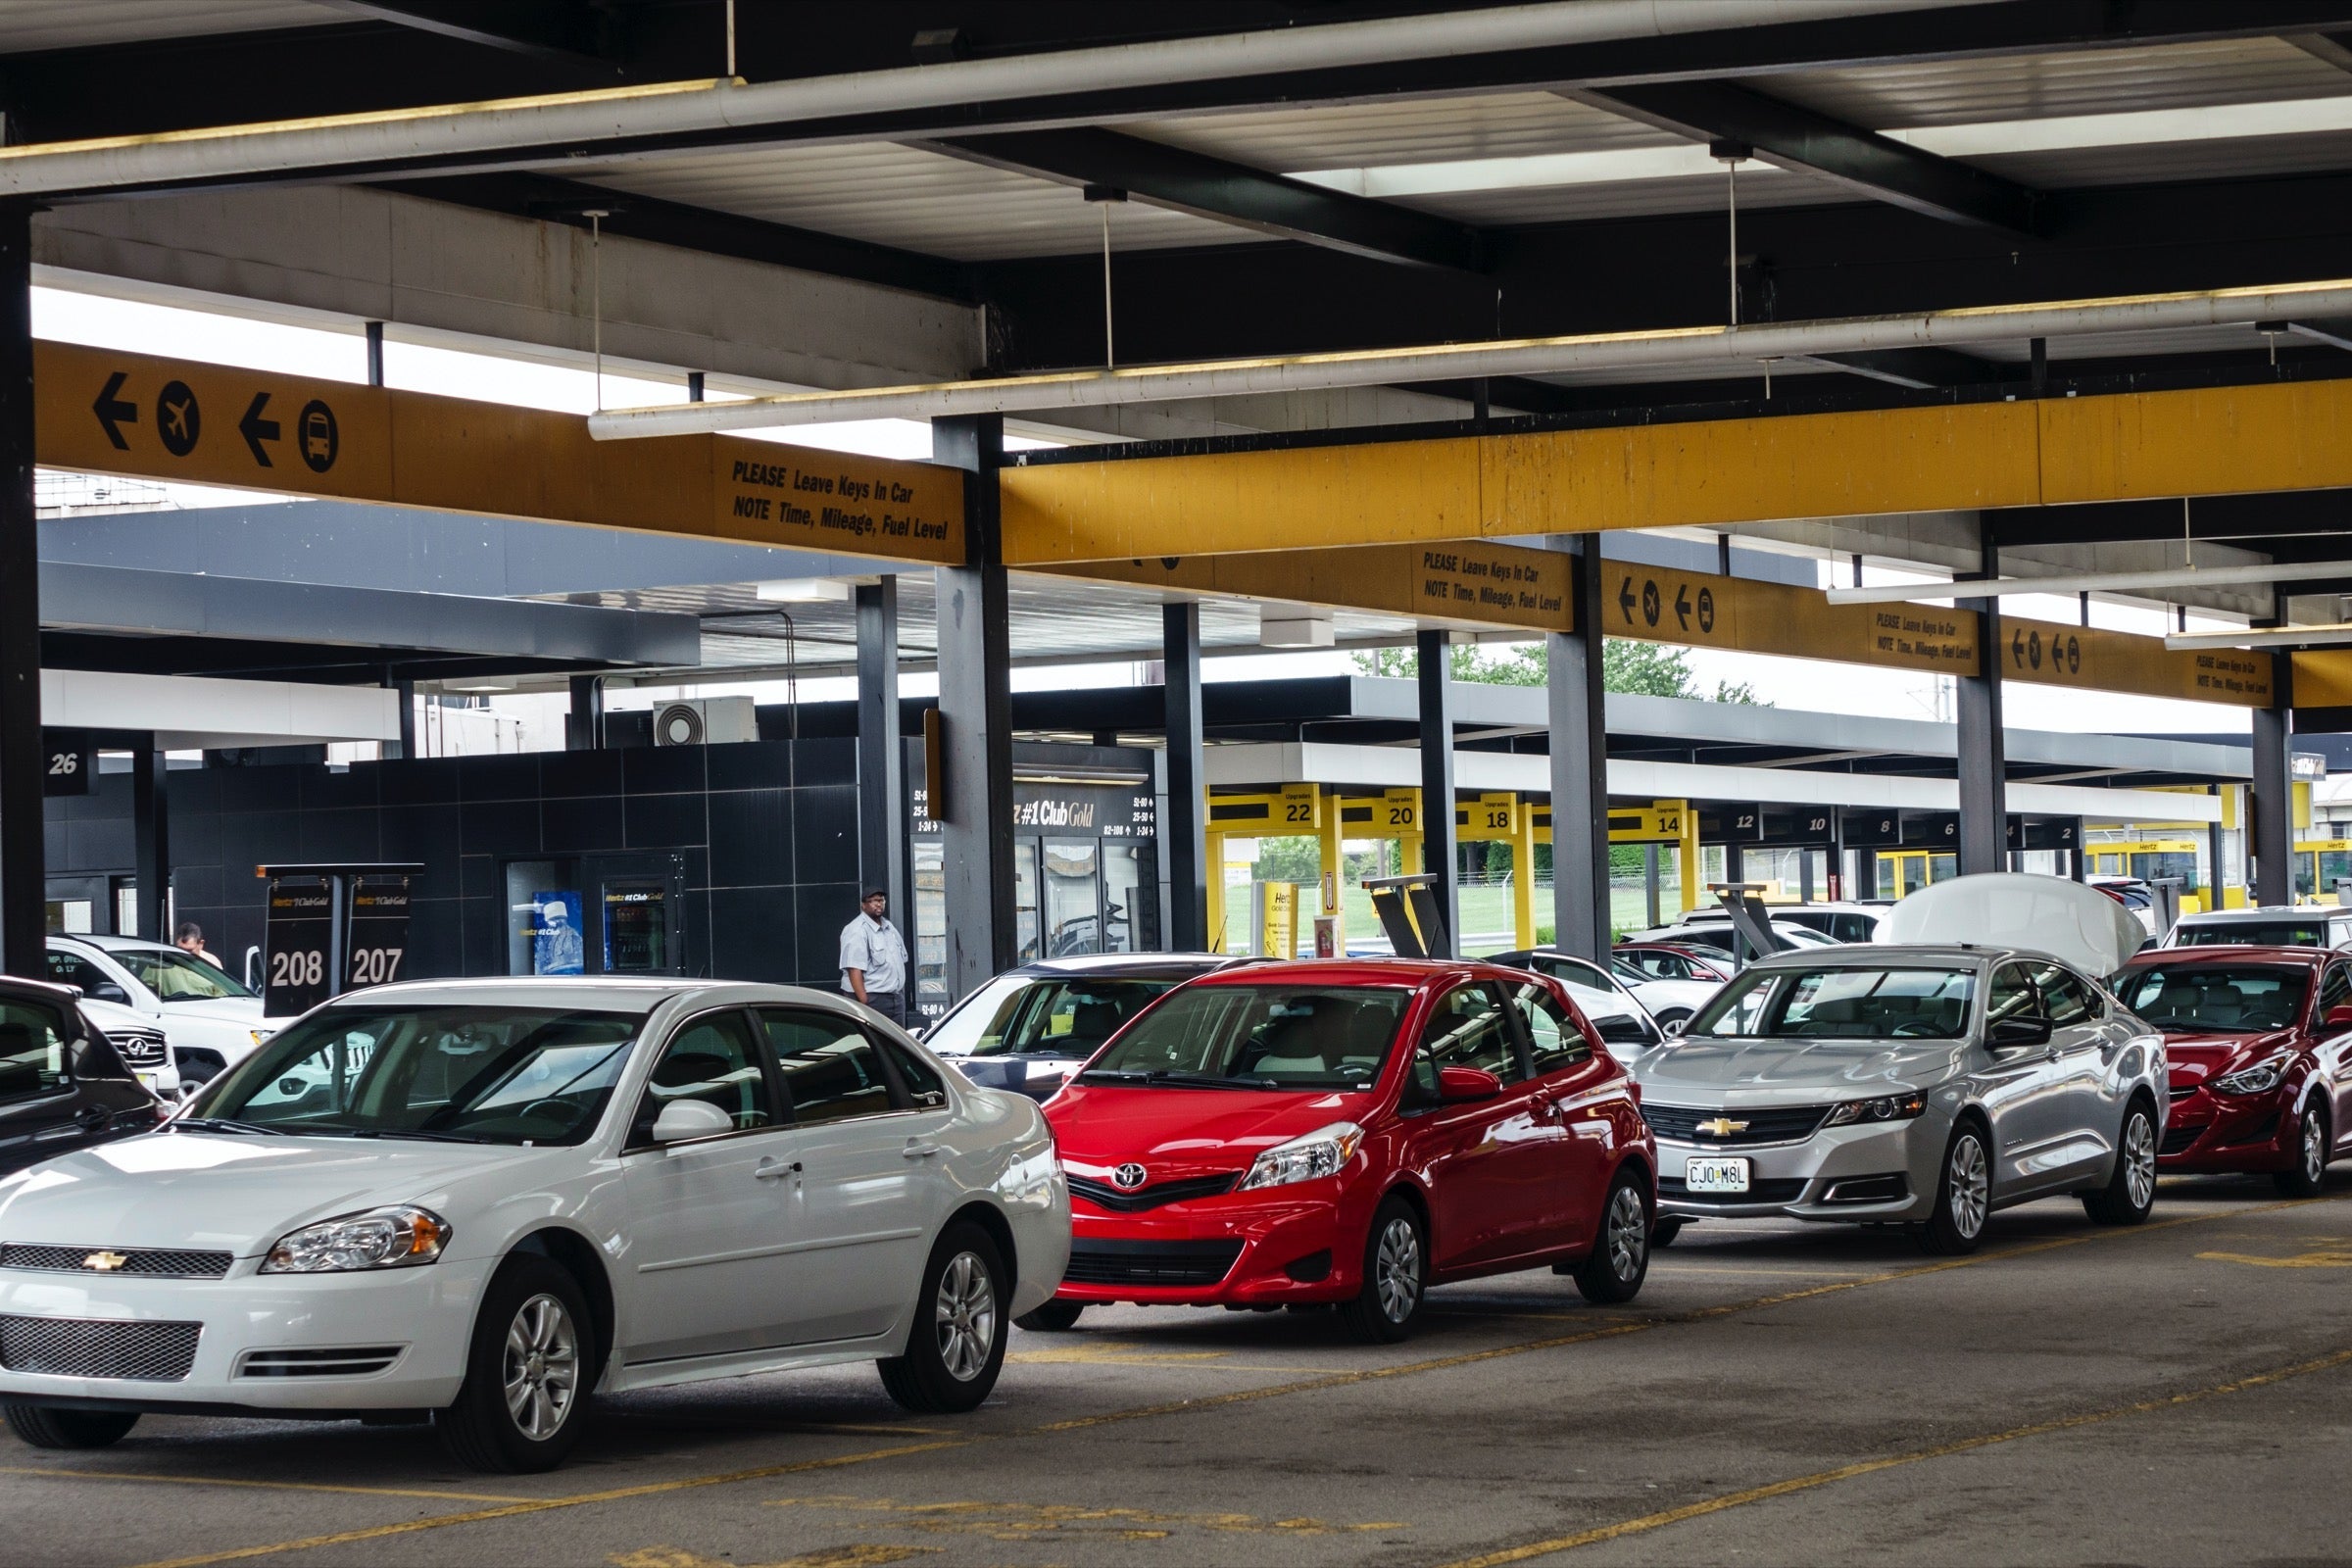 Rental car break-ins are trending � Here�s how to protect yourself